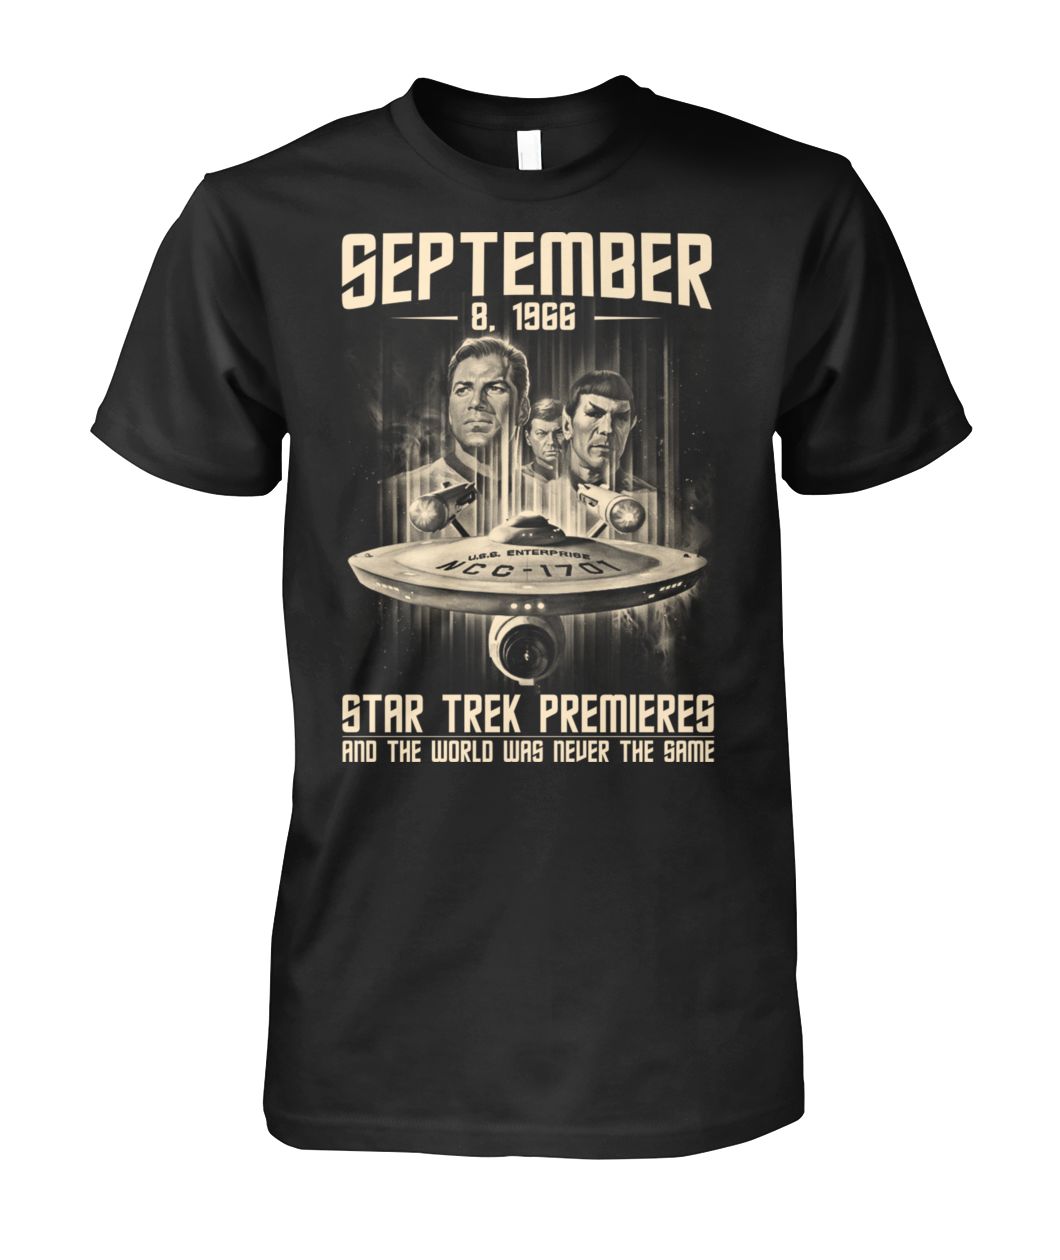 September 8-1966 Star Trek premieres and the world was never the same shirt